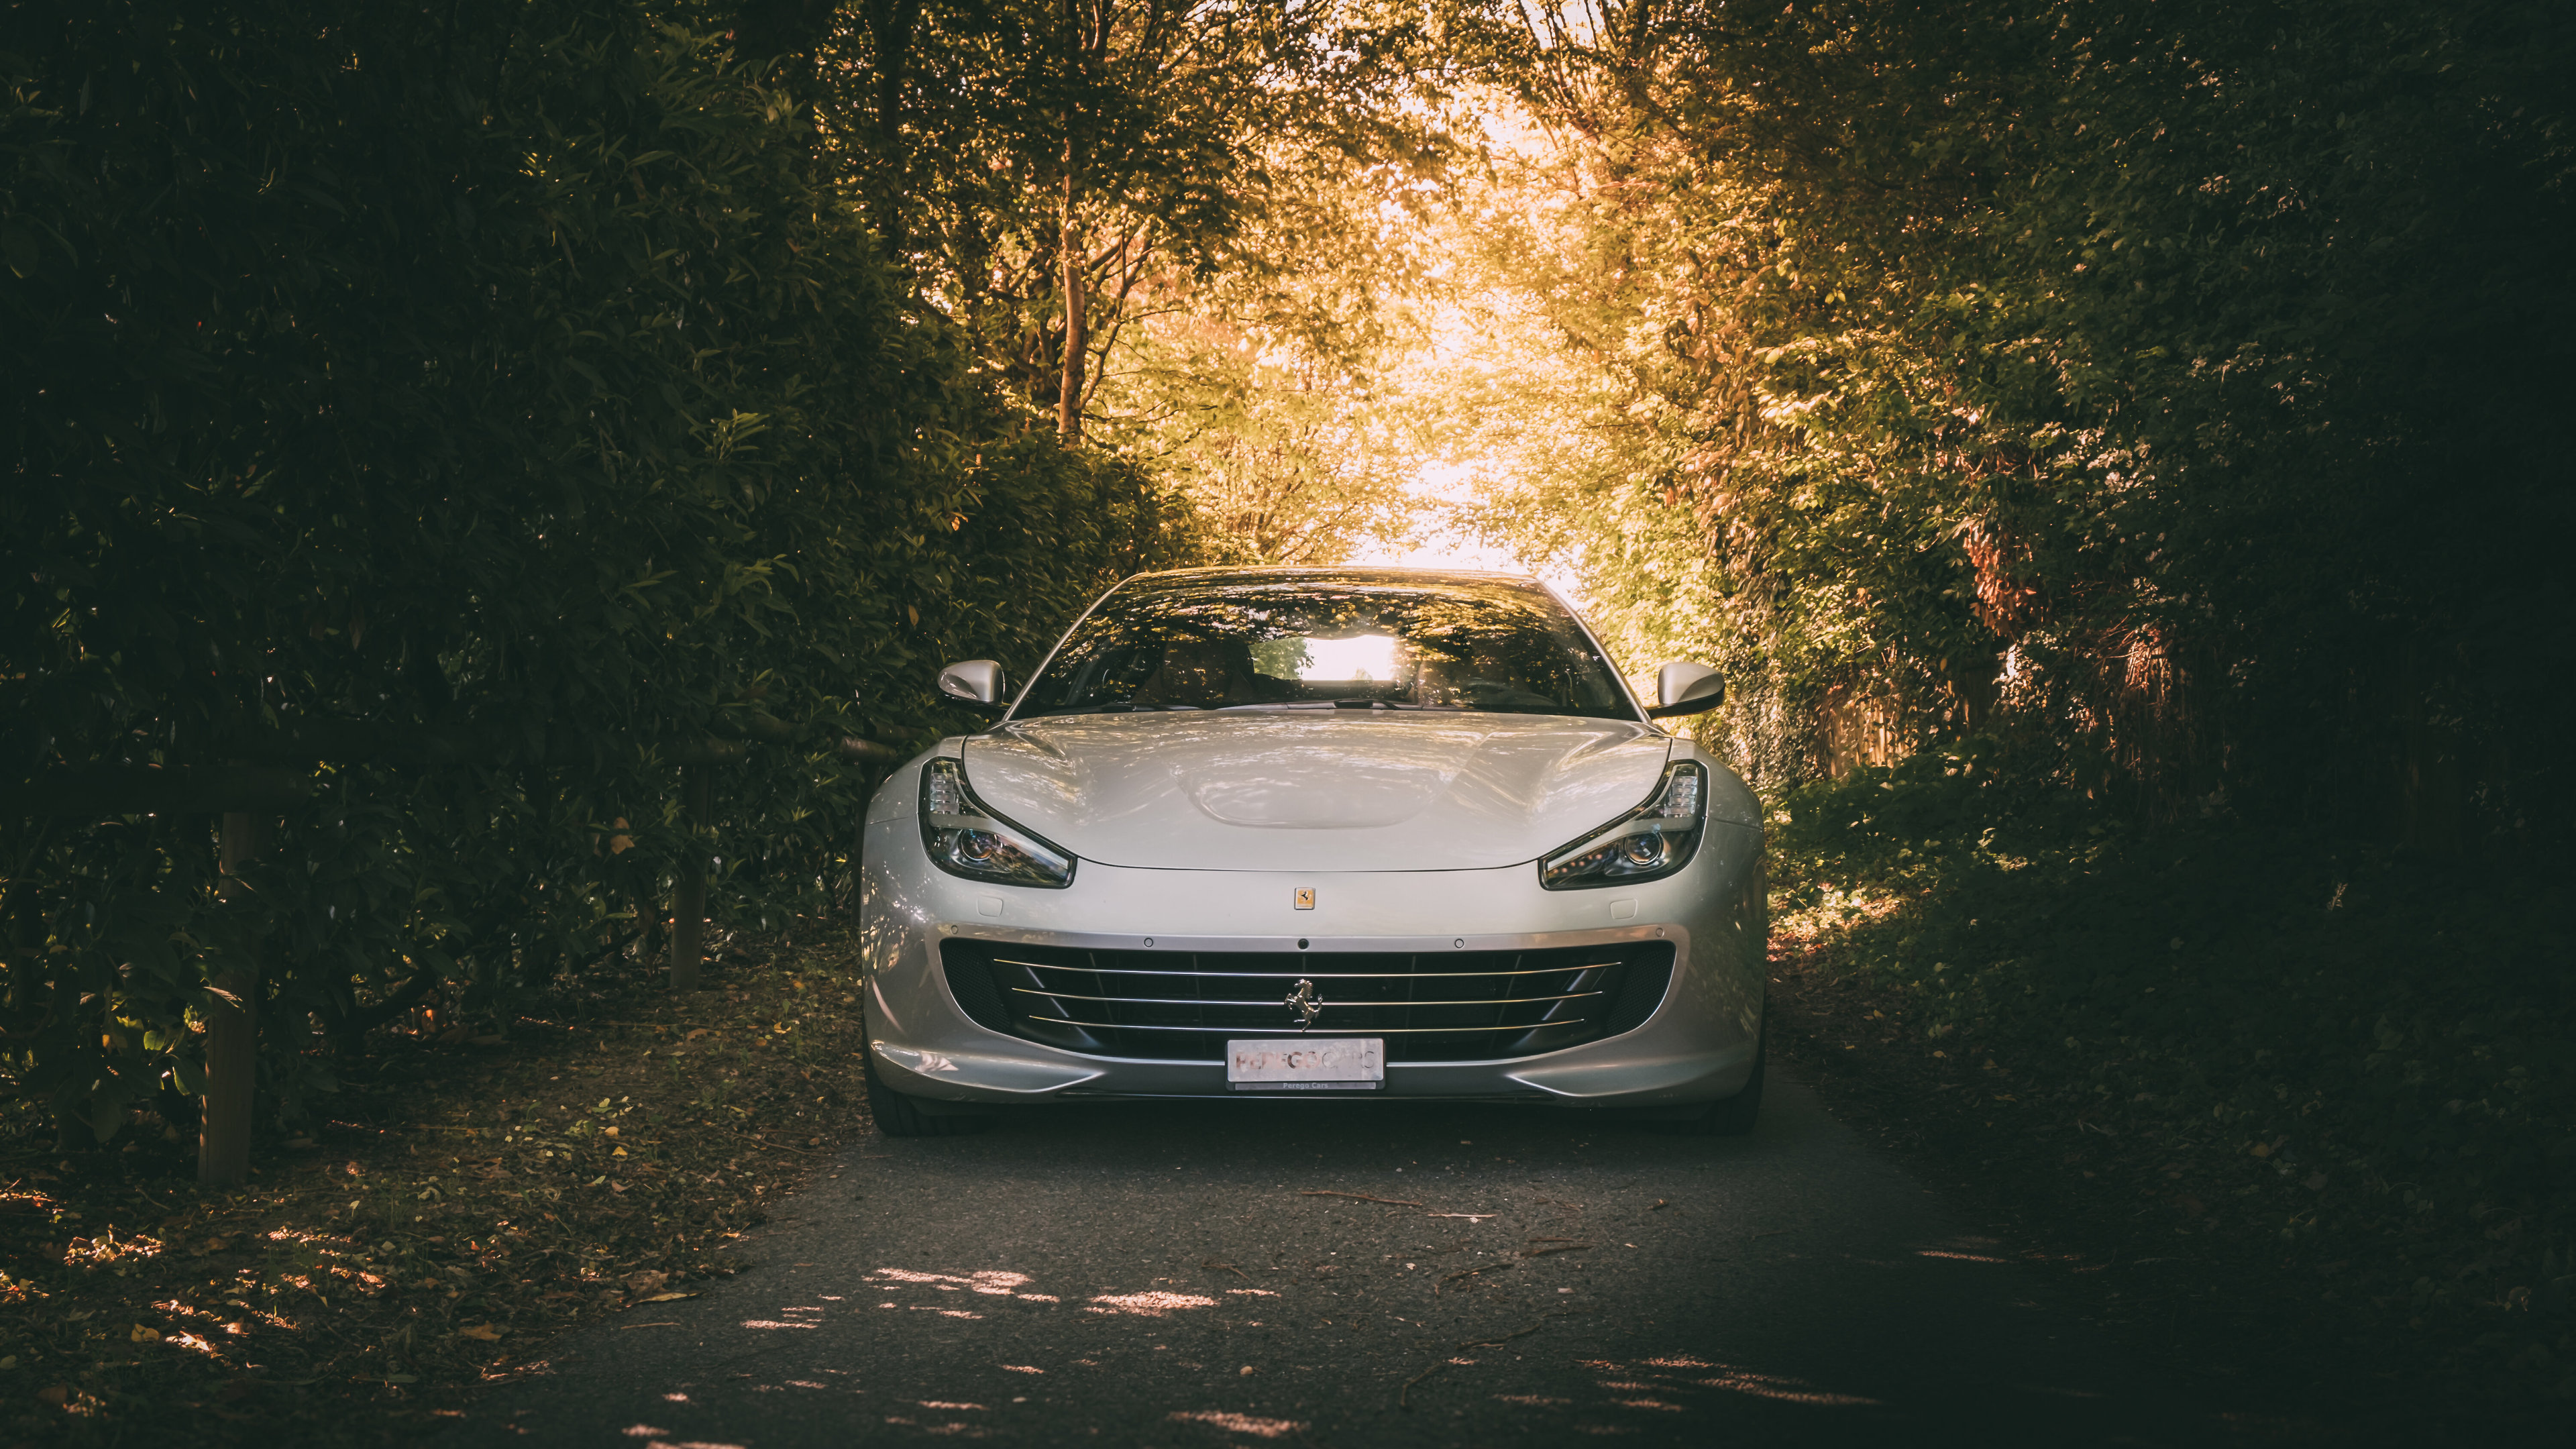 Download Feel the power of the streets with this White Ferrari Iphone  Wallpaper | Wallpapers.com